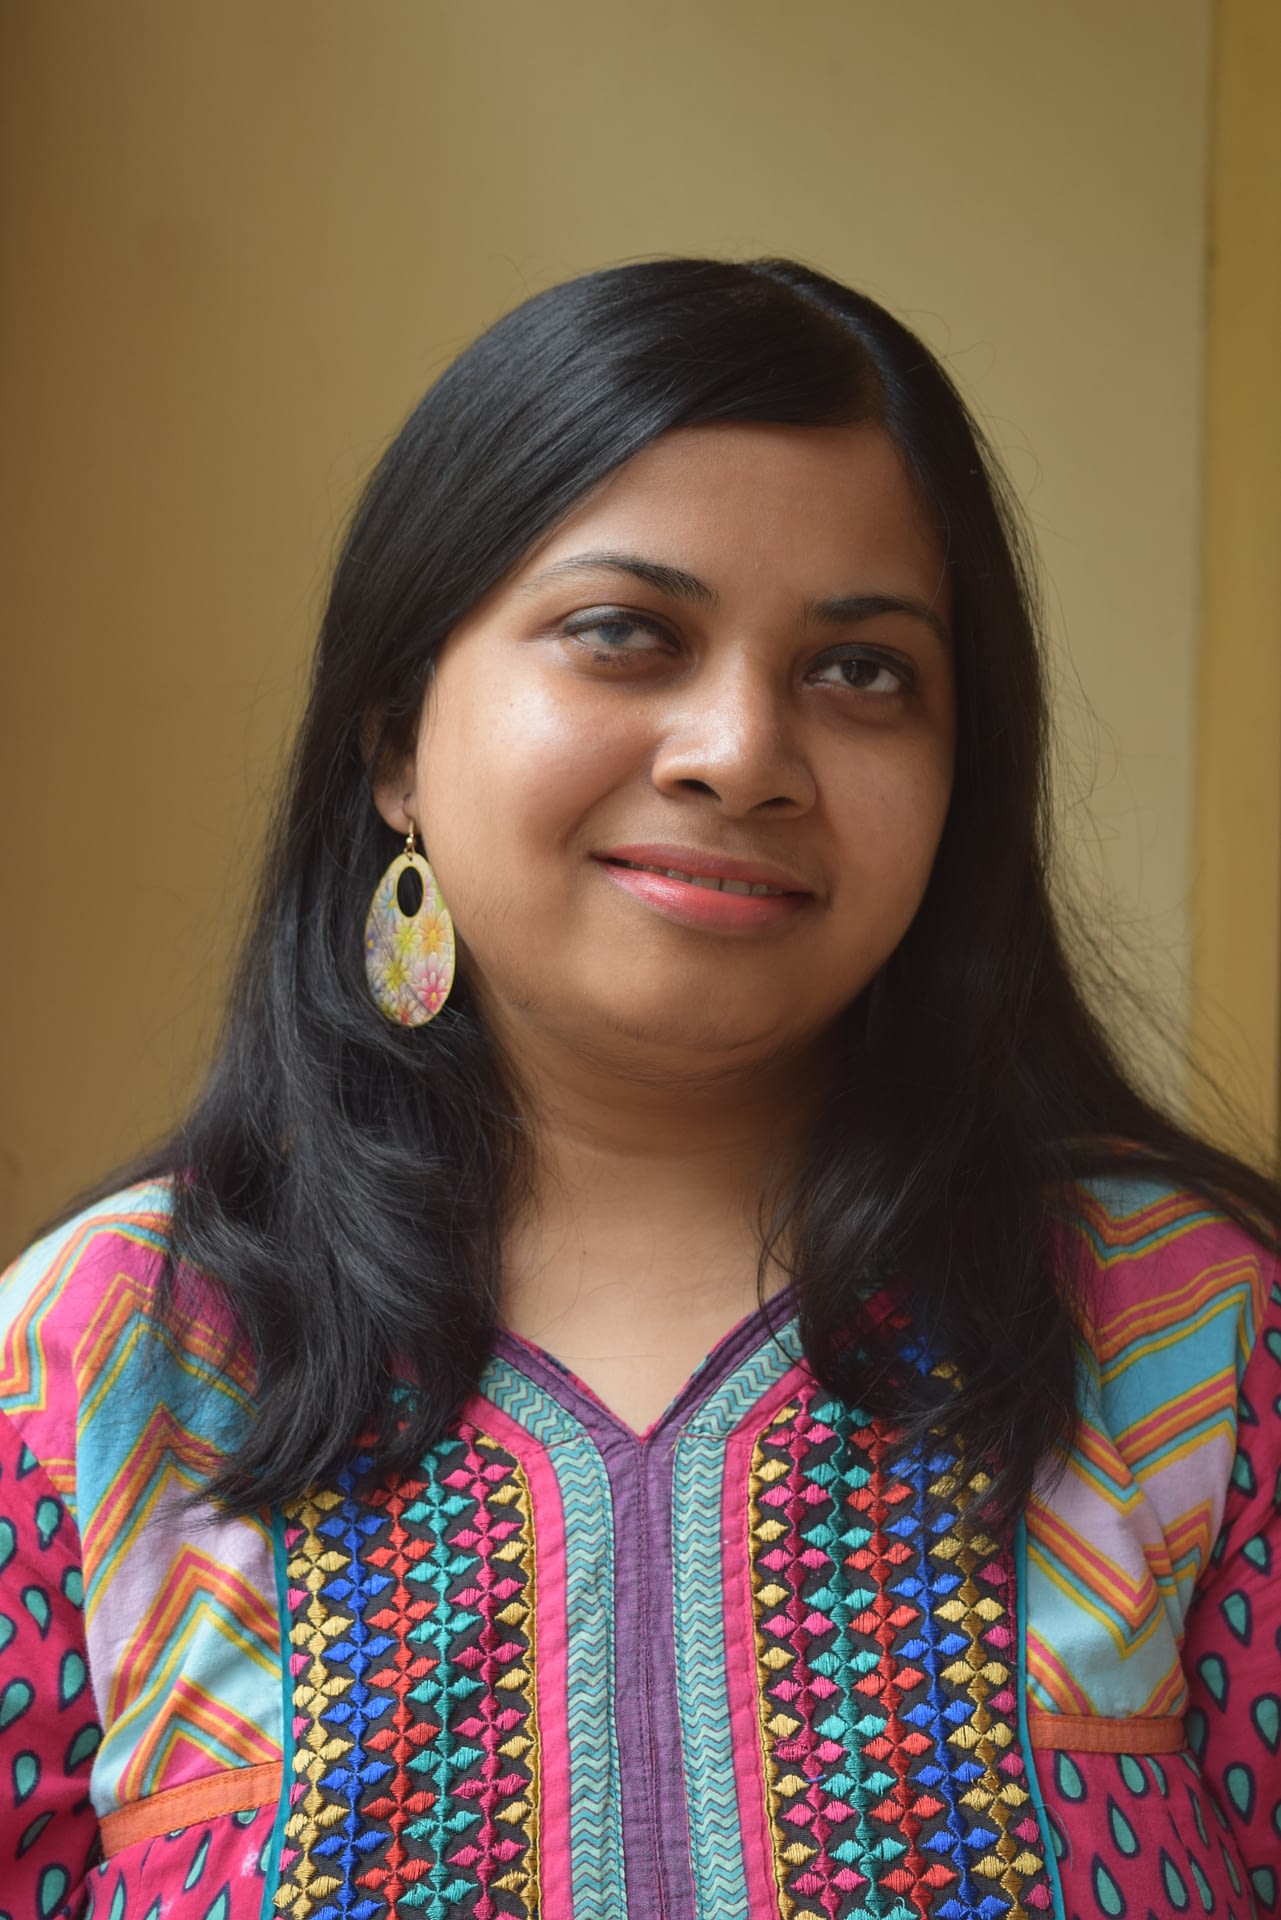 Author photo of Arundhati Nath, an Indian woman with shoulder length black hair. She is wearing a bright patterned top.